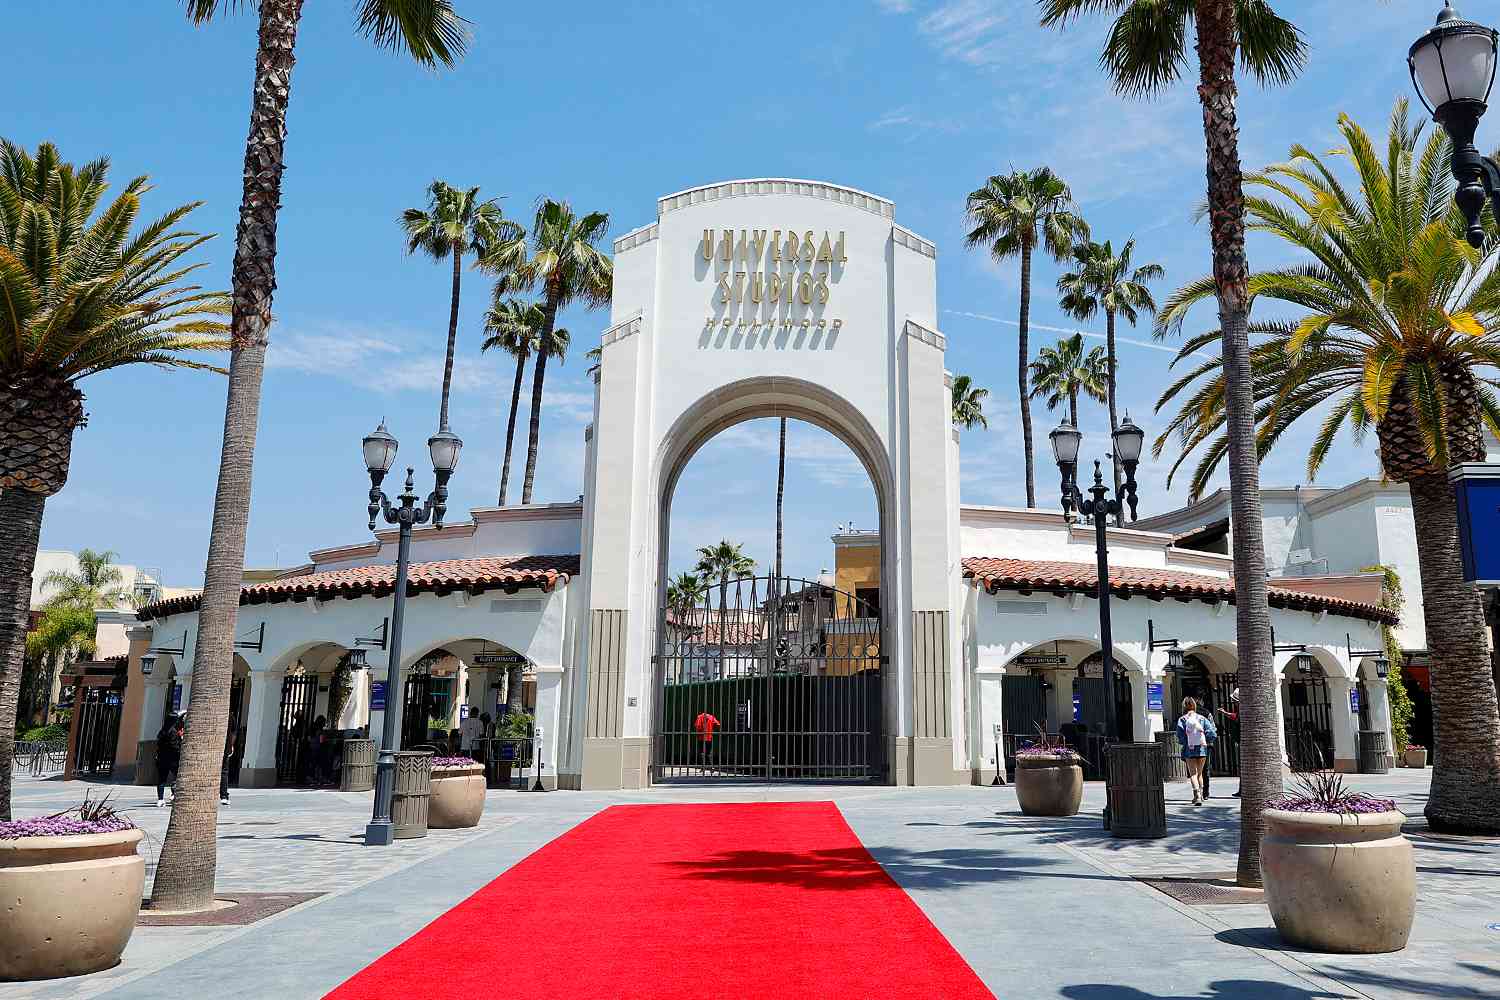 The entrance to Universal Studios is seen during Universal Studios Hollywood grand reopening media day at Universal Studios Hollywood on April 15, 2021 in Universal City, California. 